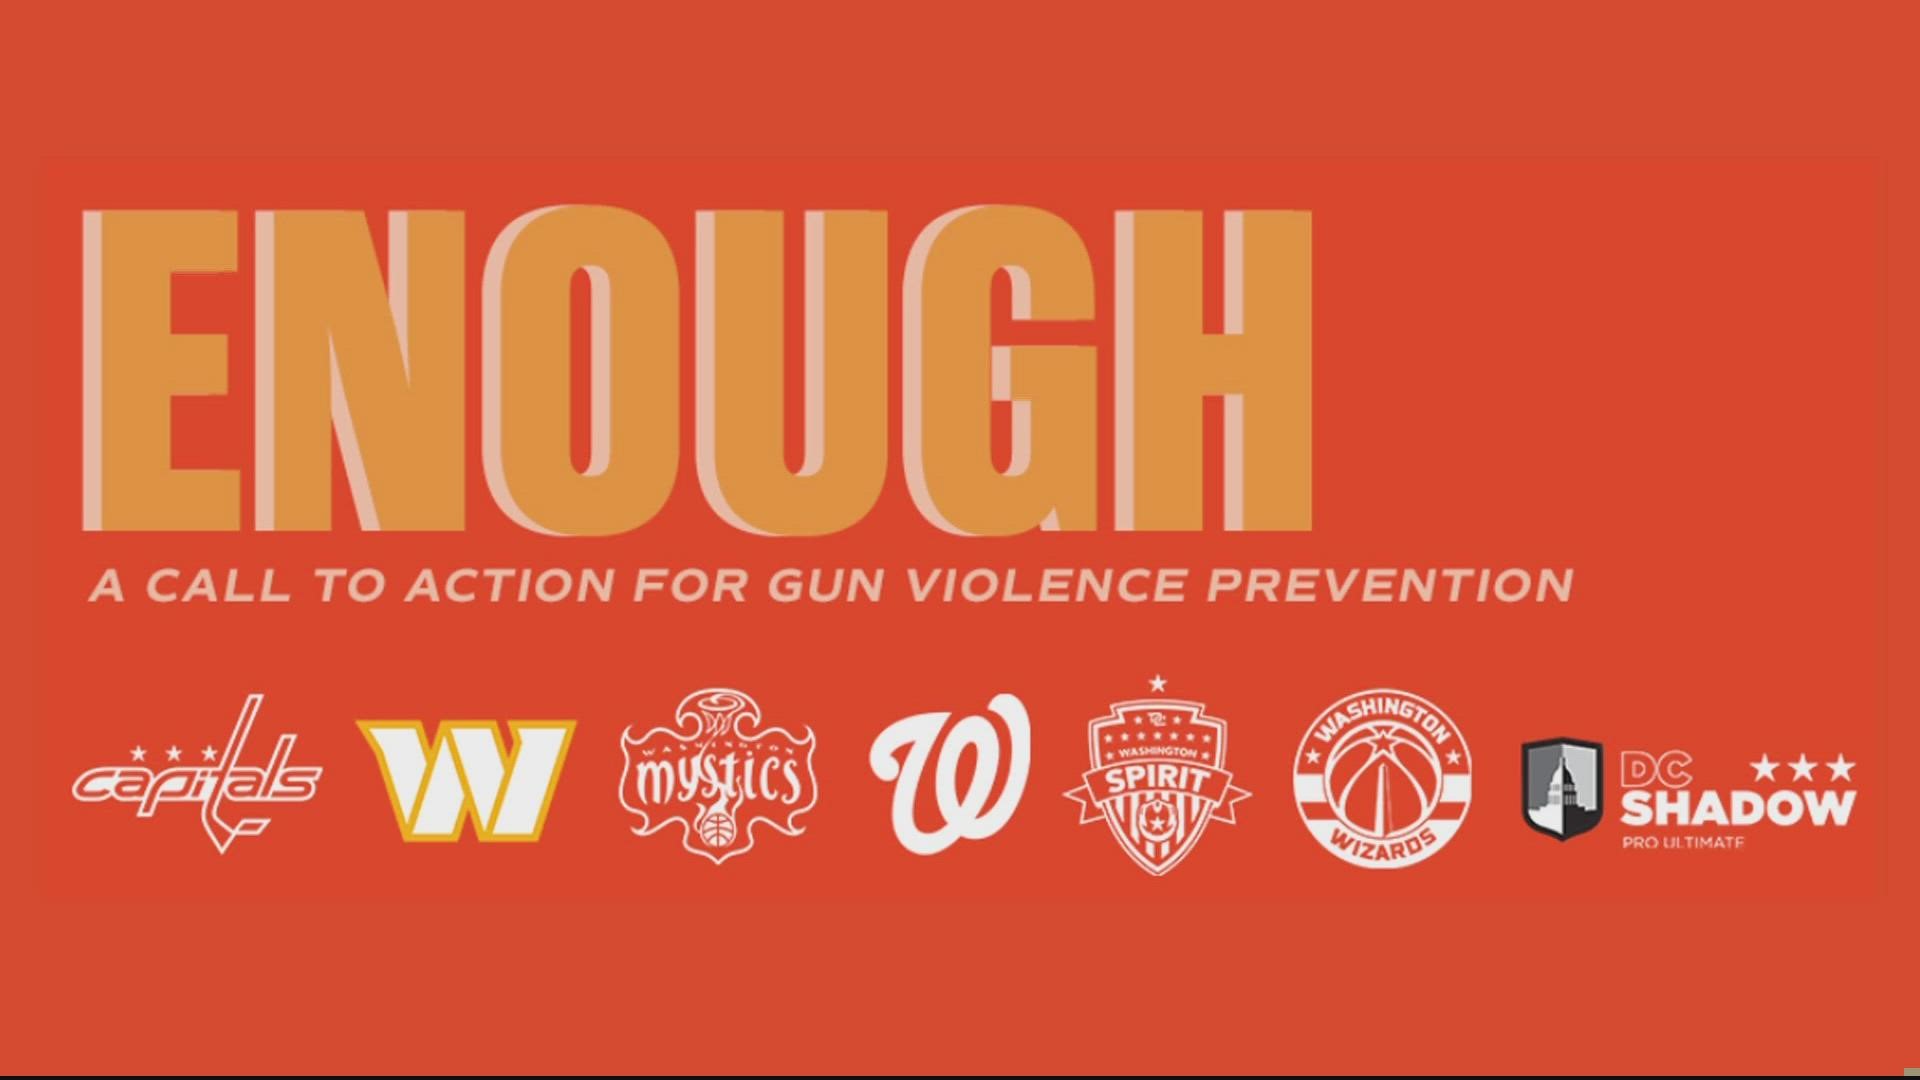 DC athletic teams are coming together to stand again gun violence. Some teams will be donating earnings from select sales and events to relieve gun violence.